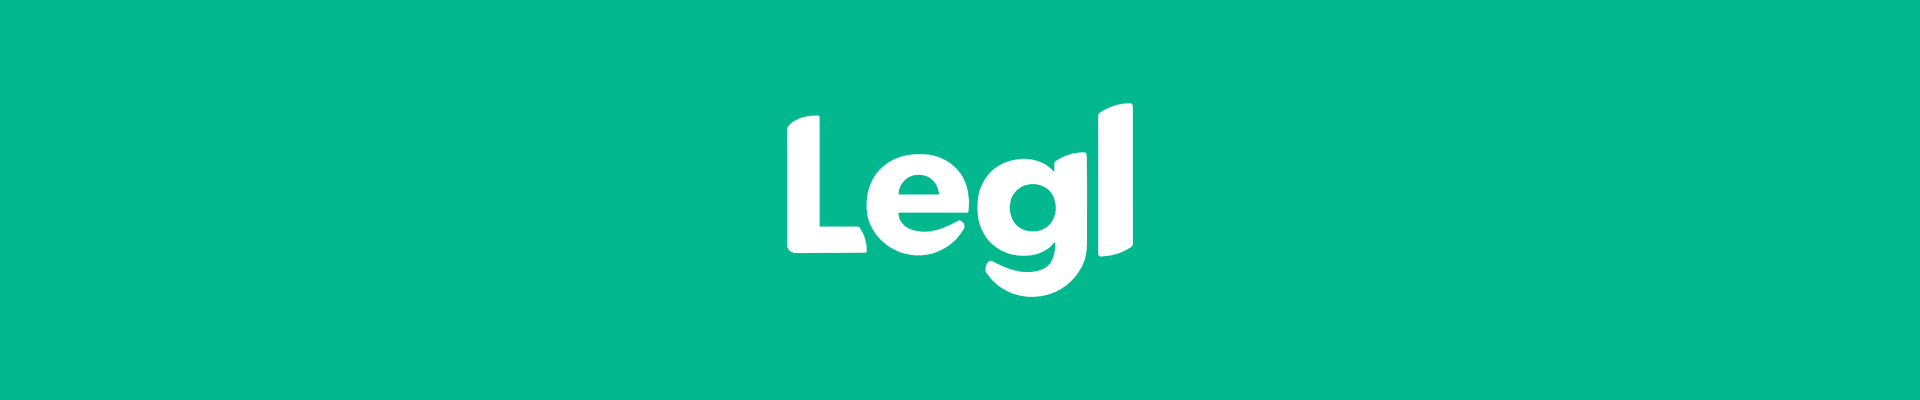 Advanced and Legl partner to streamline client onboarding